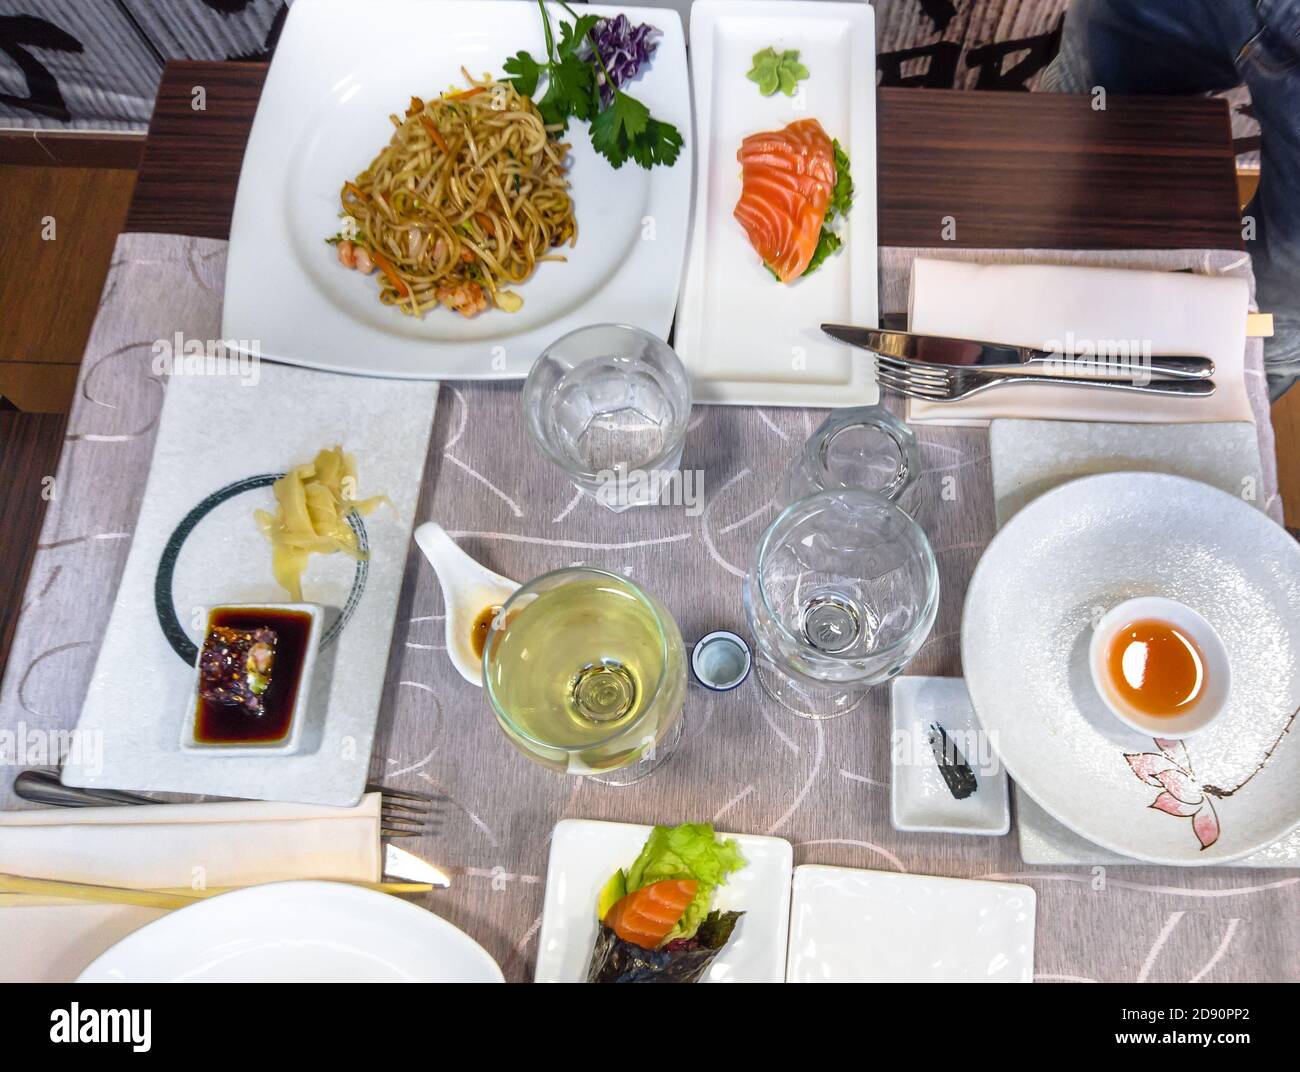 Japanese dinner on a table full of delicious dishes. fresh salmon sushi, shrimps spaghetti and white wine. Stock Photo